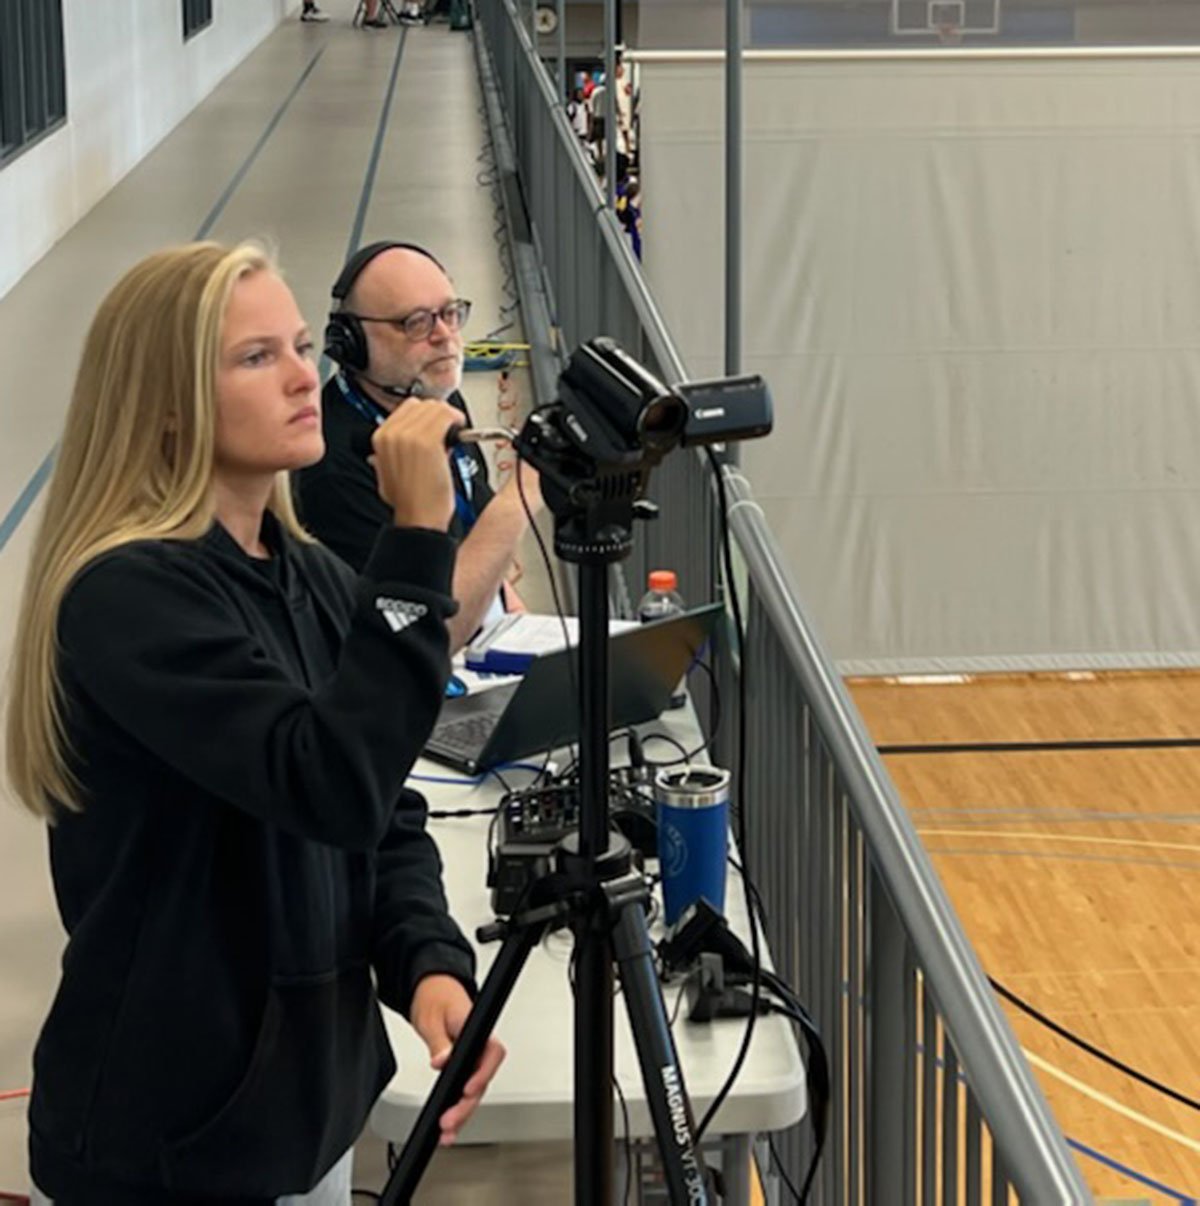 Broadcast Crew at a Basketball Game